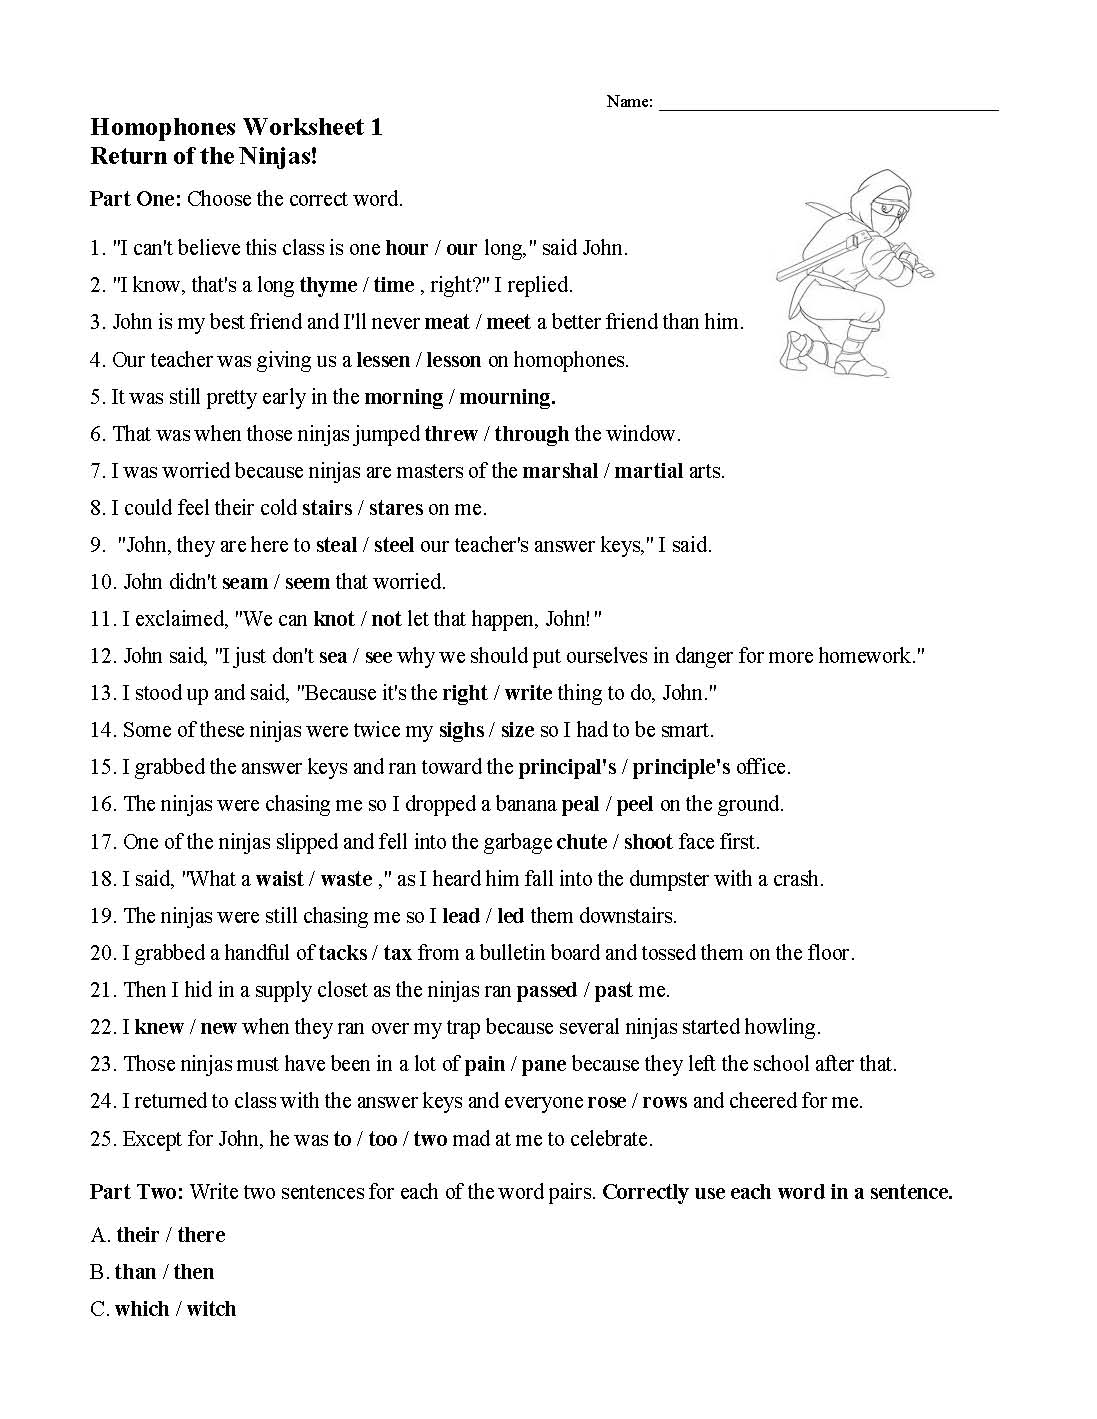 This is a preview image of Homophones Worksheet 1. Click on it to enlarge it or view the source file.